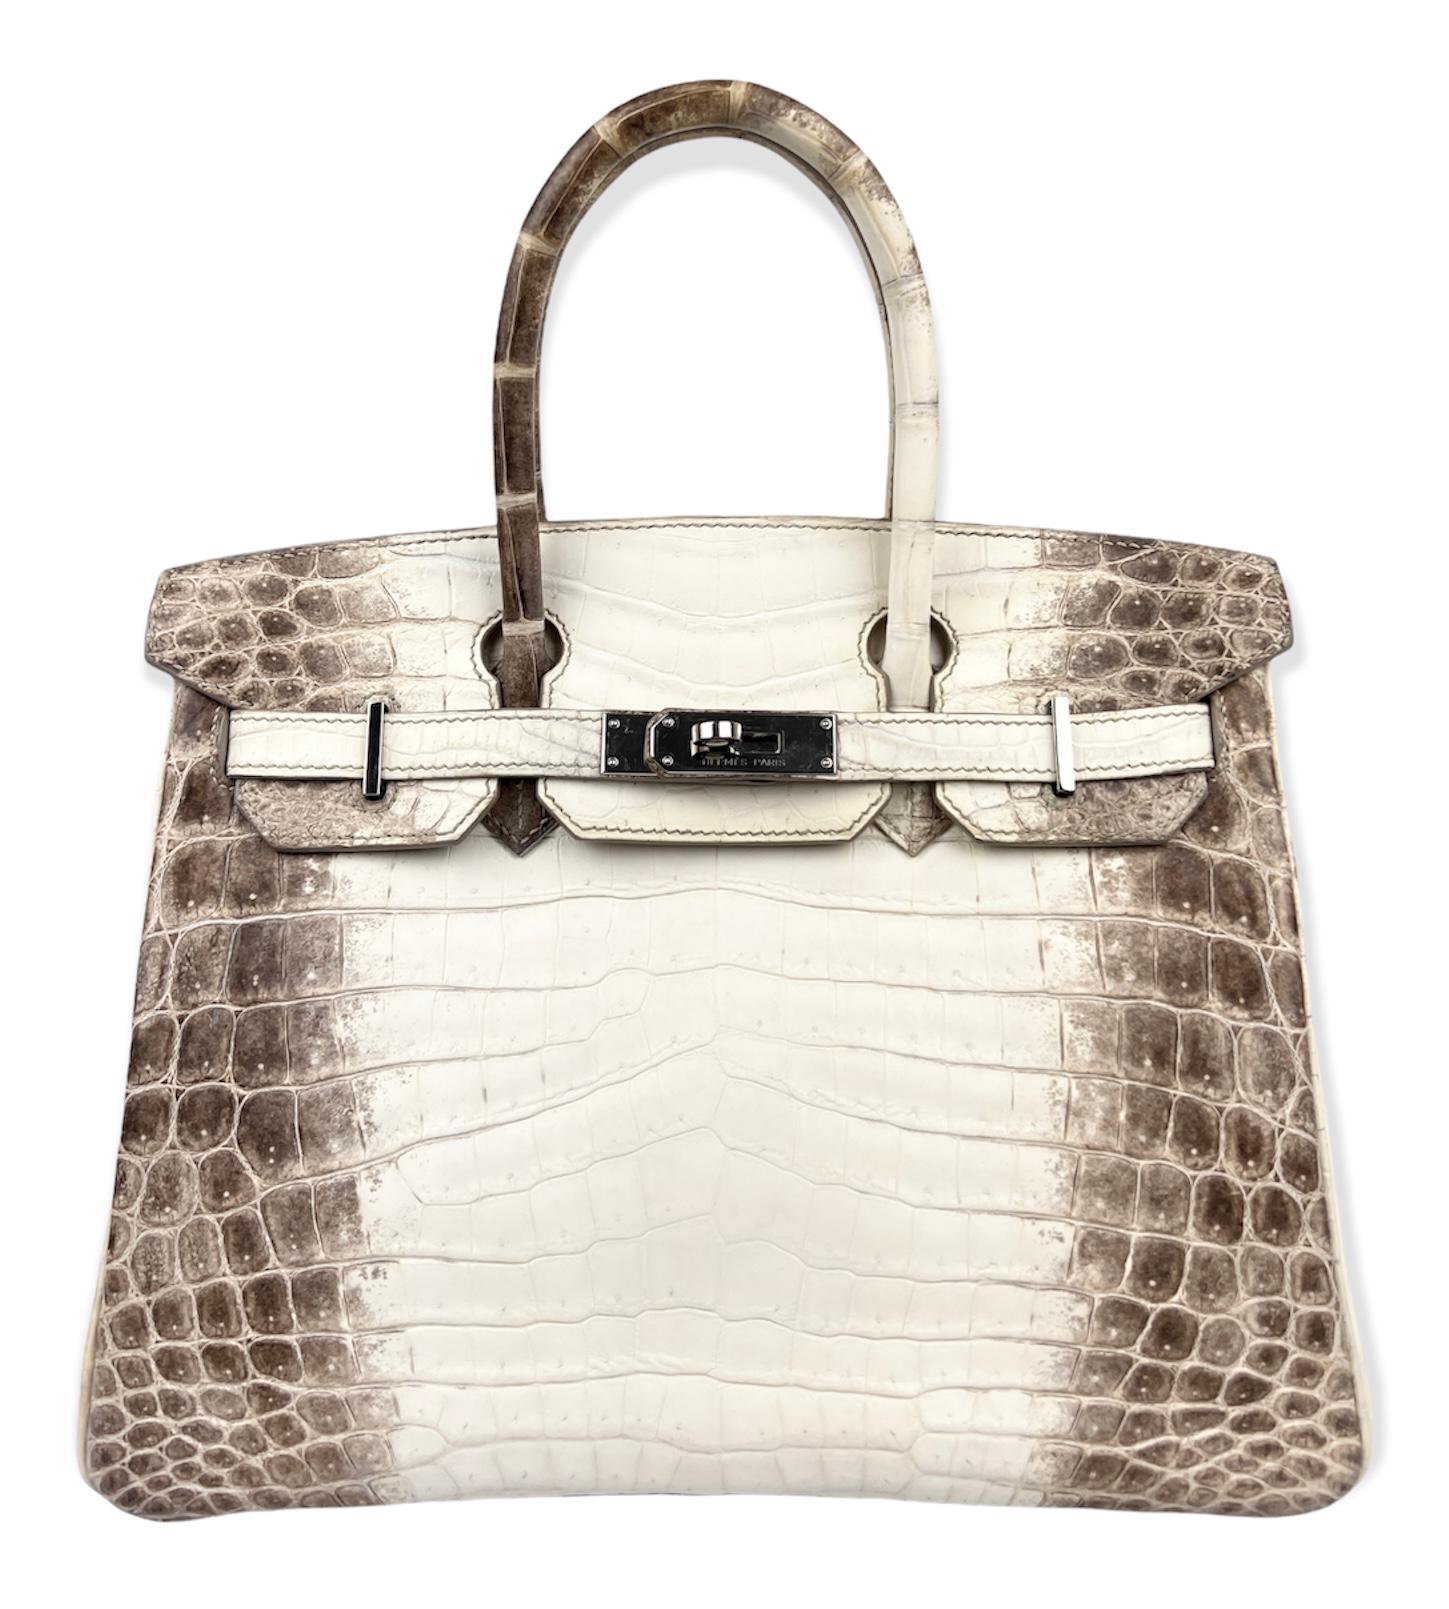 Hermès Birkin 30 Himalayas in Excellent Condition For Sale at 1stDibs